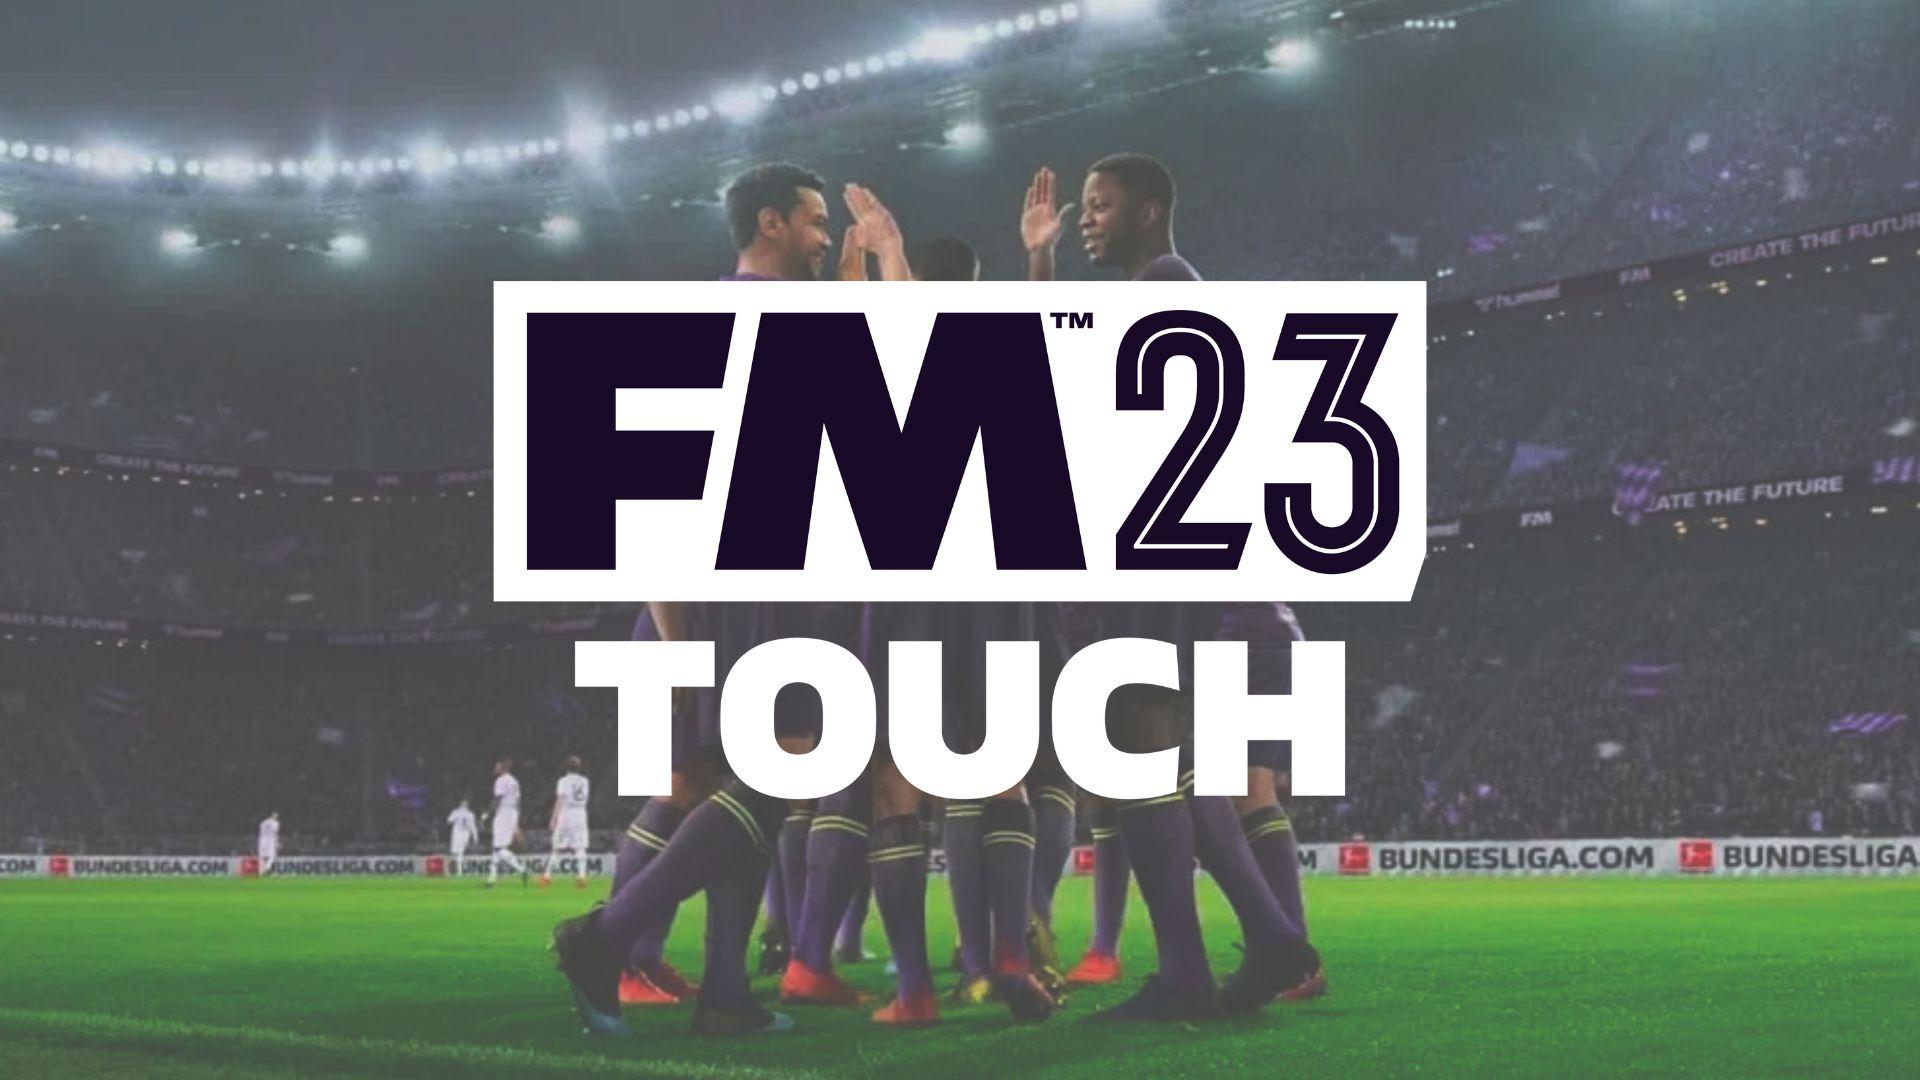 Football Manager 23 players with FM23 Touch logo